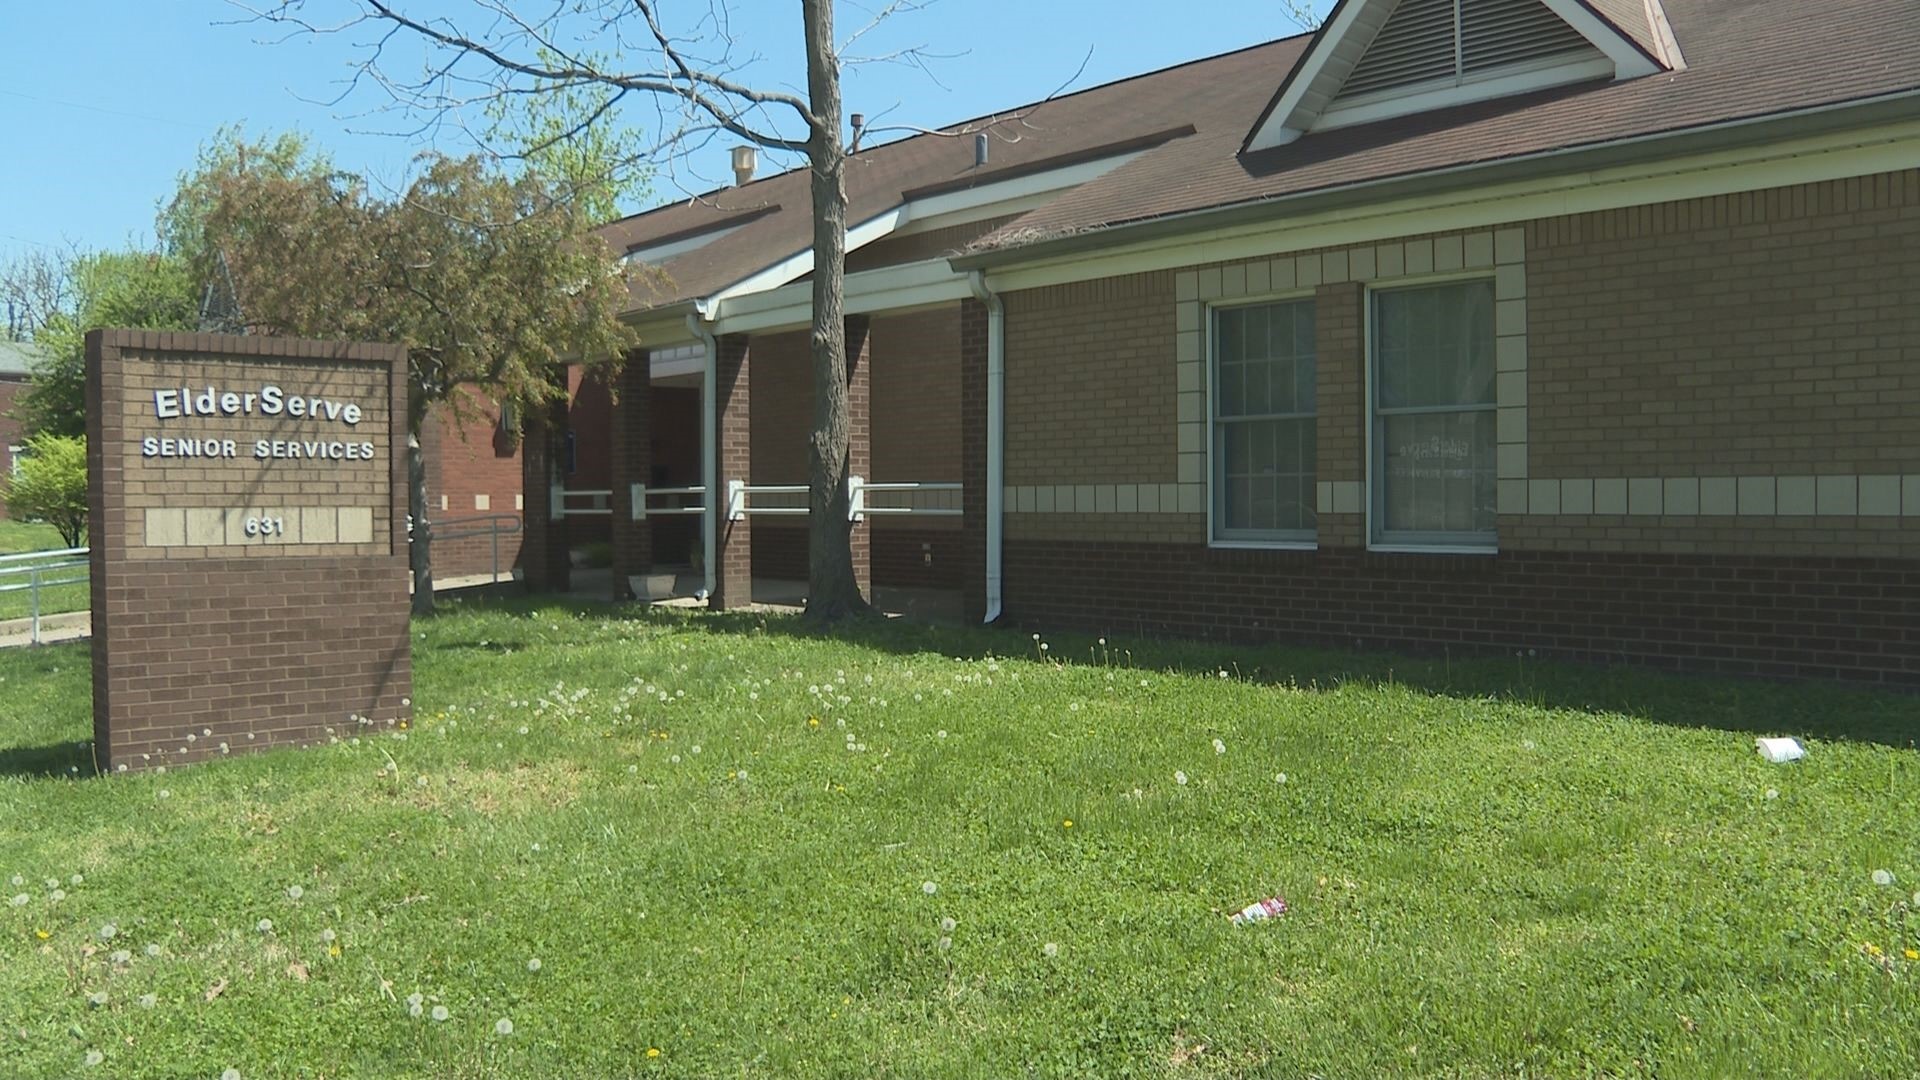 Some recreational and social activities will start back up at the senior center on Wednesday, welcoming in dozens who have sorely missed the services.